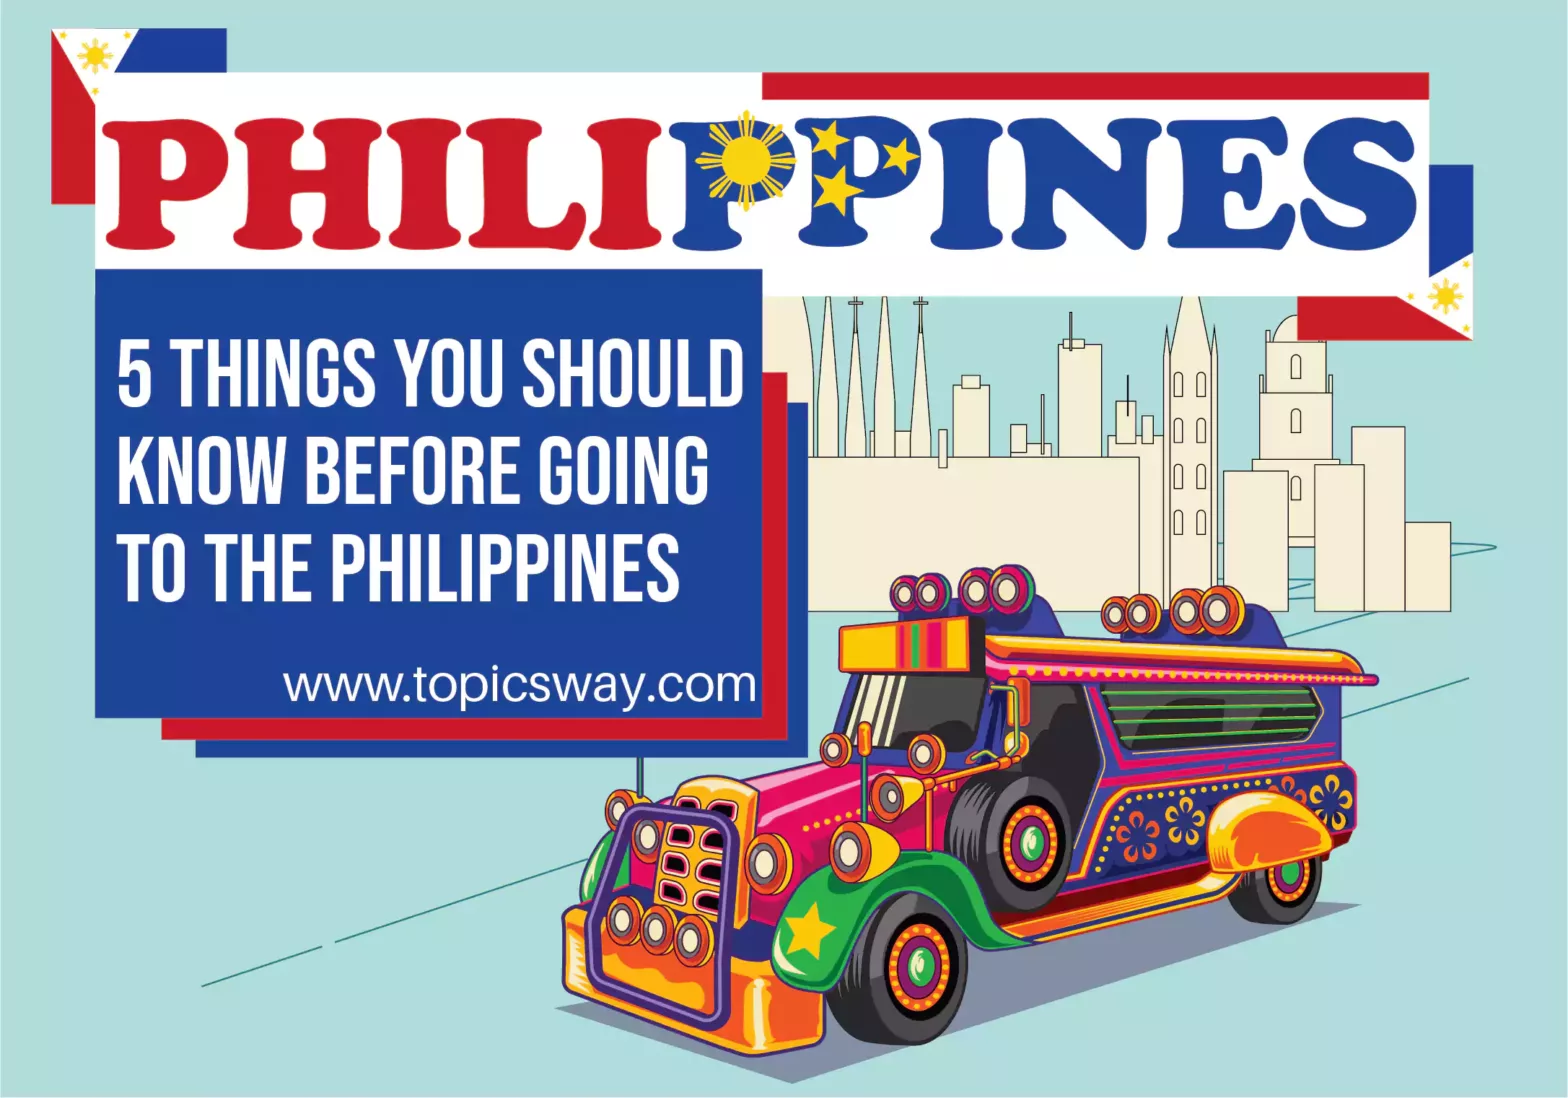 5 Things You Should Know Before Going To The Philippines